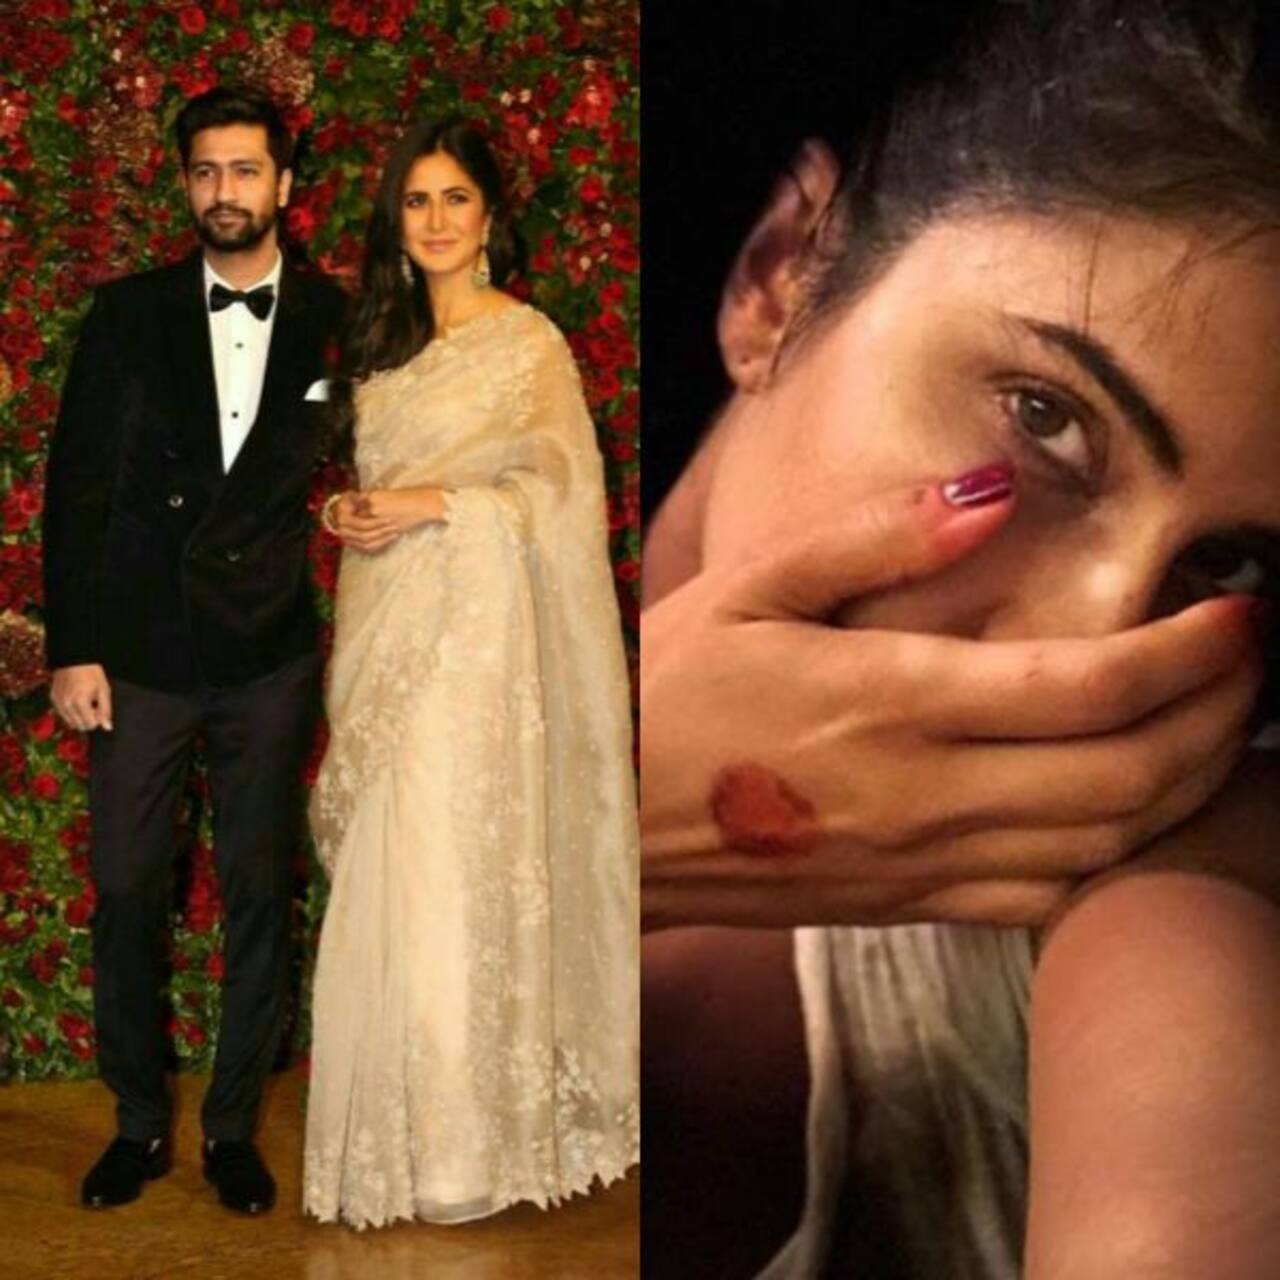 Katrina Kaif-Vicky Kaushal wedding: Special henna worth Rs 1 lakh from Rajasthan's Sojat for the bride's mehendi